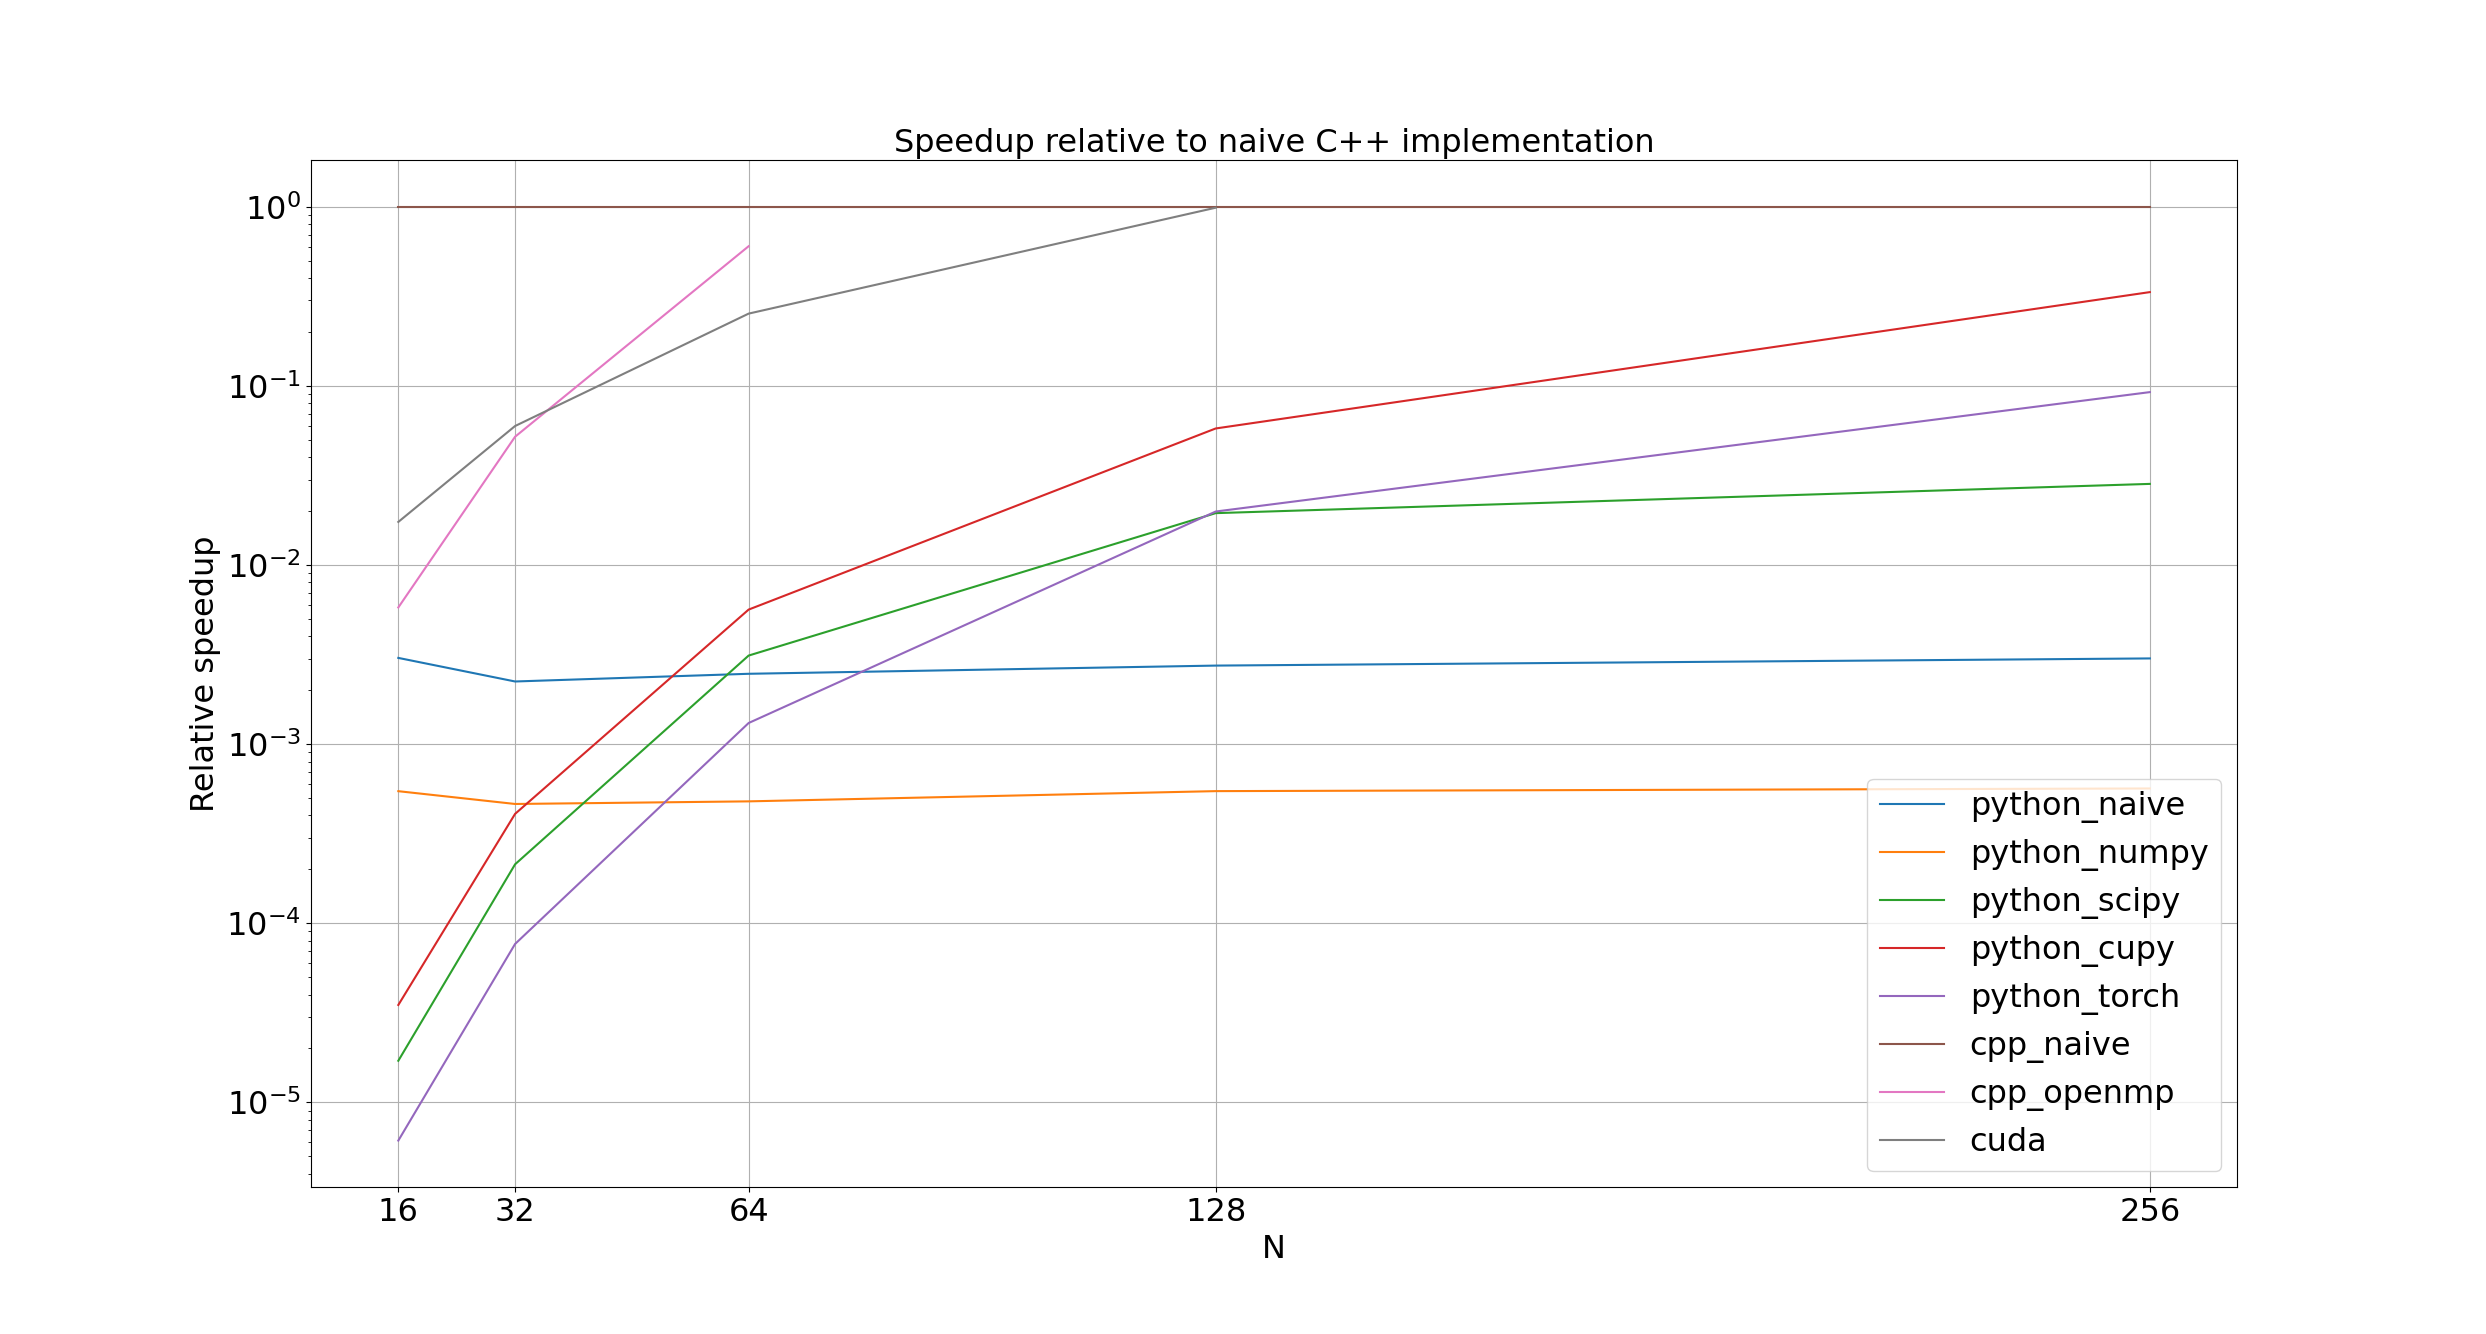 Speedup with respect to naive C++ implementation, zoomed-in on bottom left corner